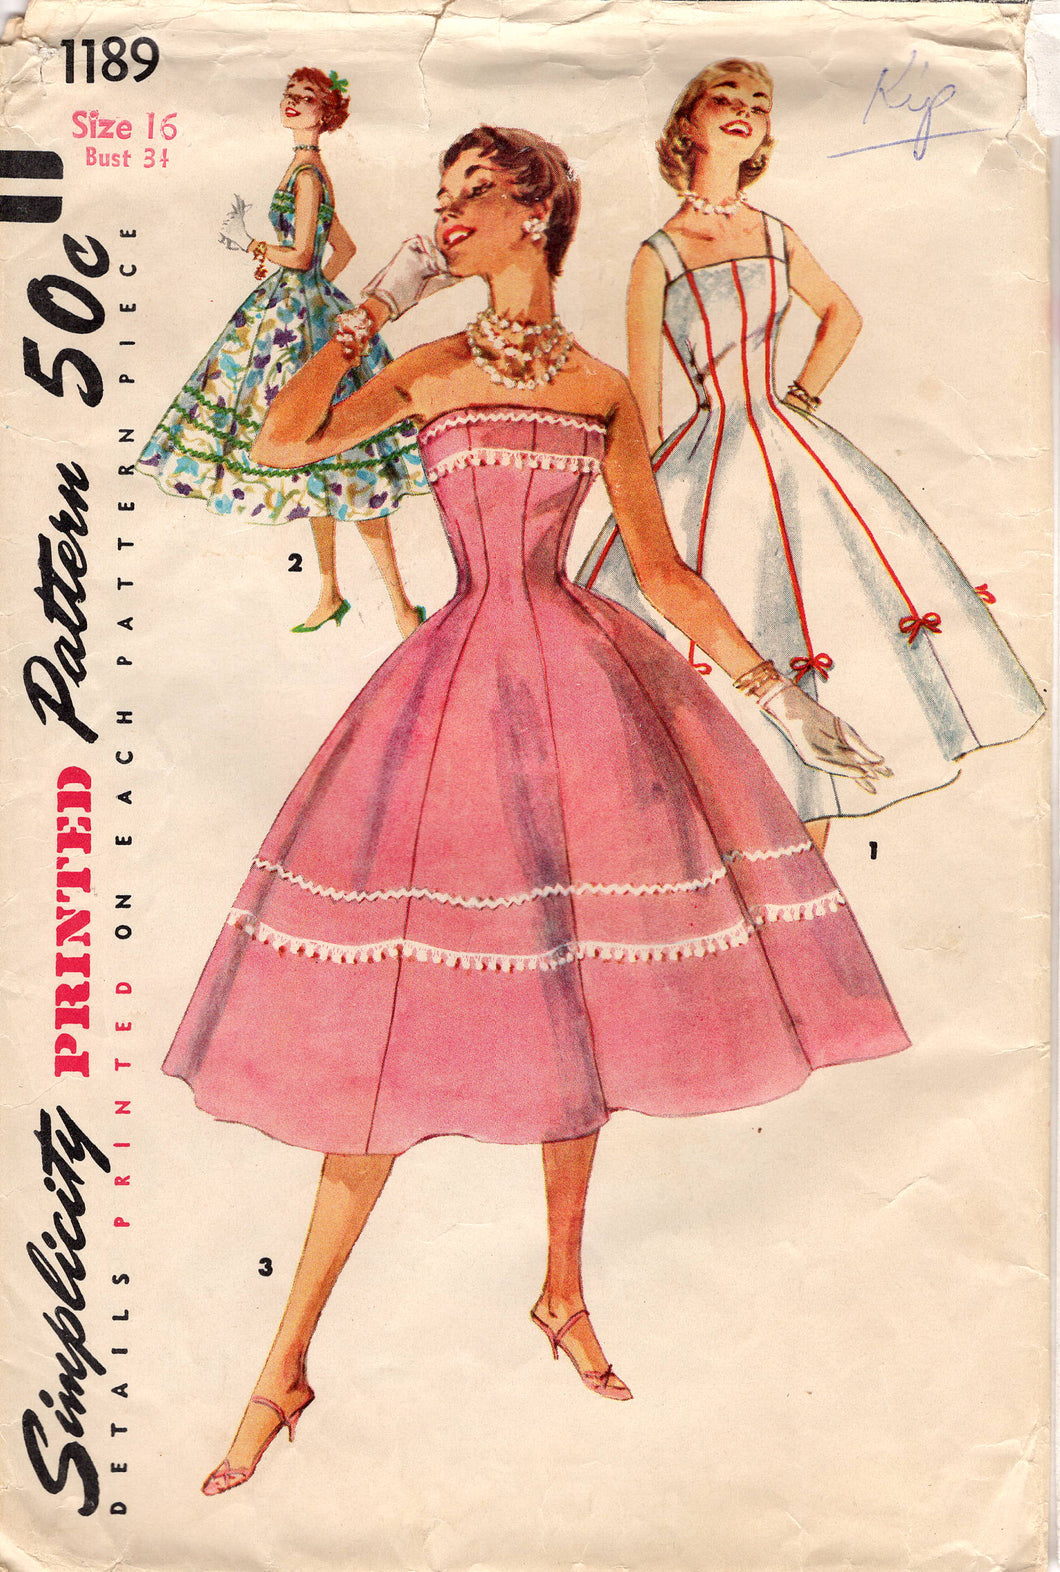 1950's Simplicity Strap or Strapless Princess line Dress Pattern - Bust 34